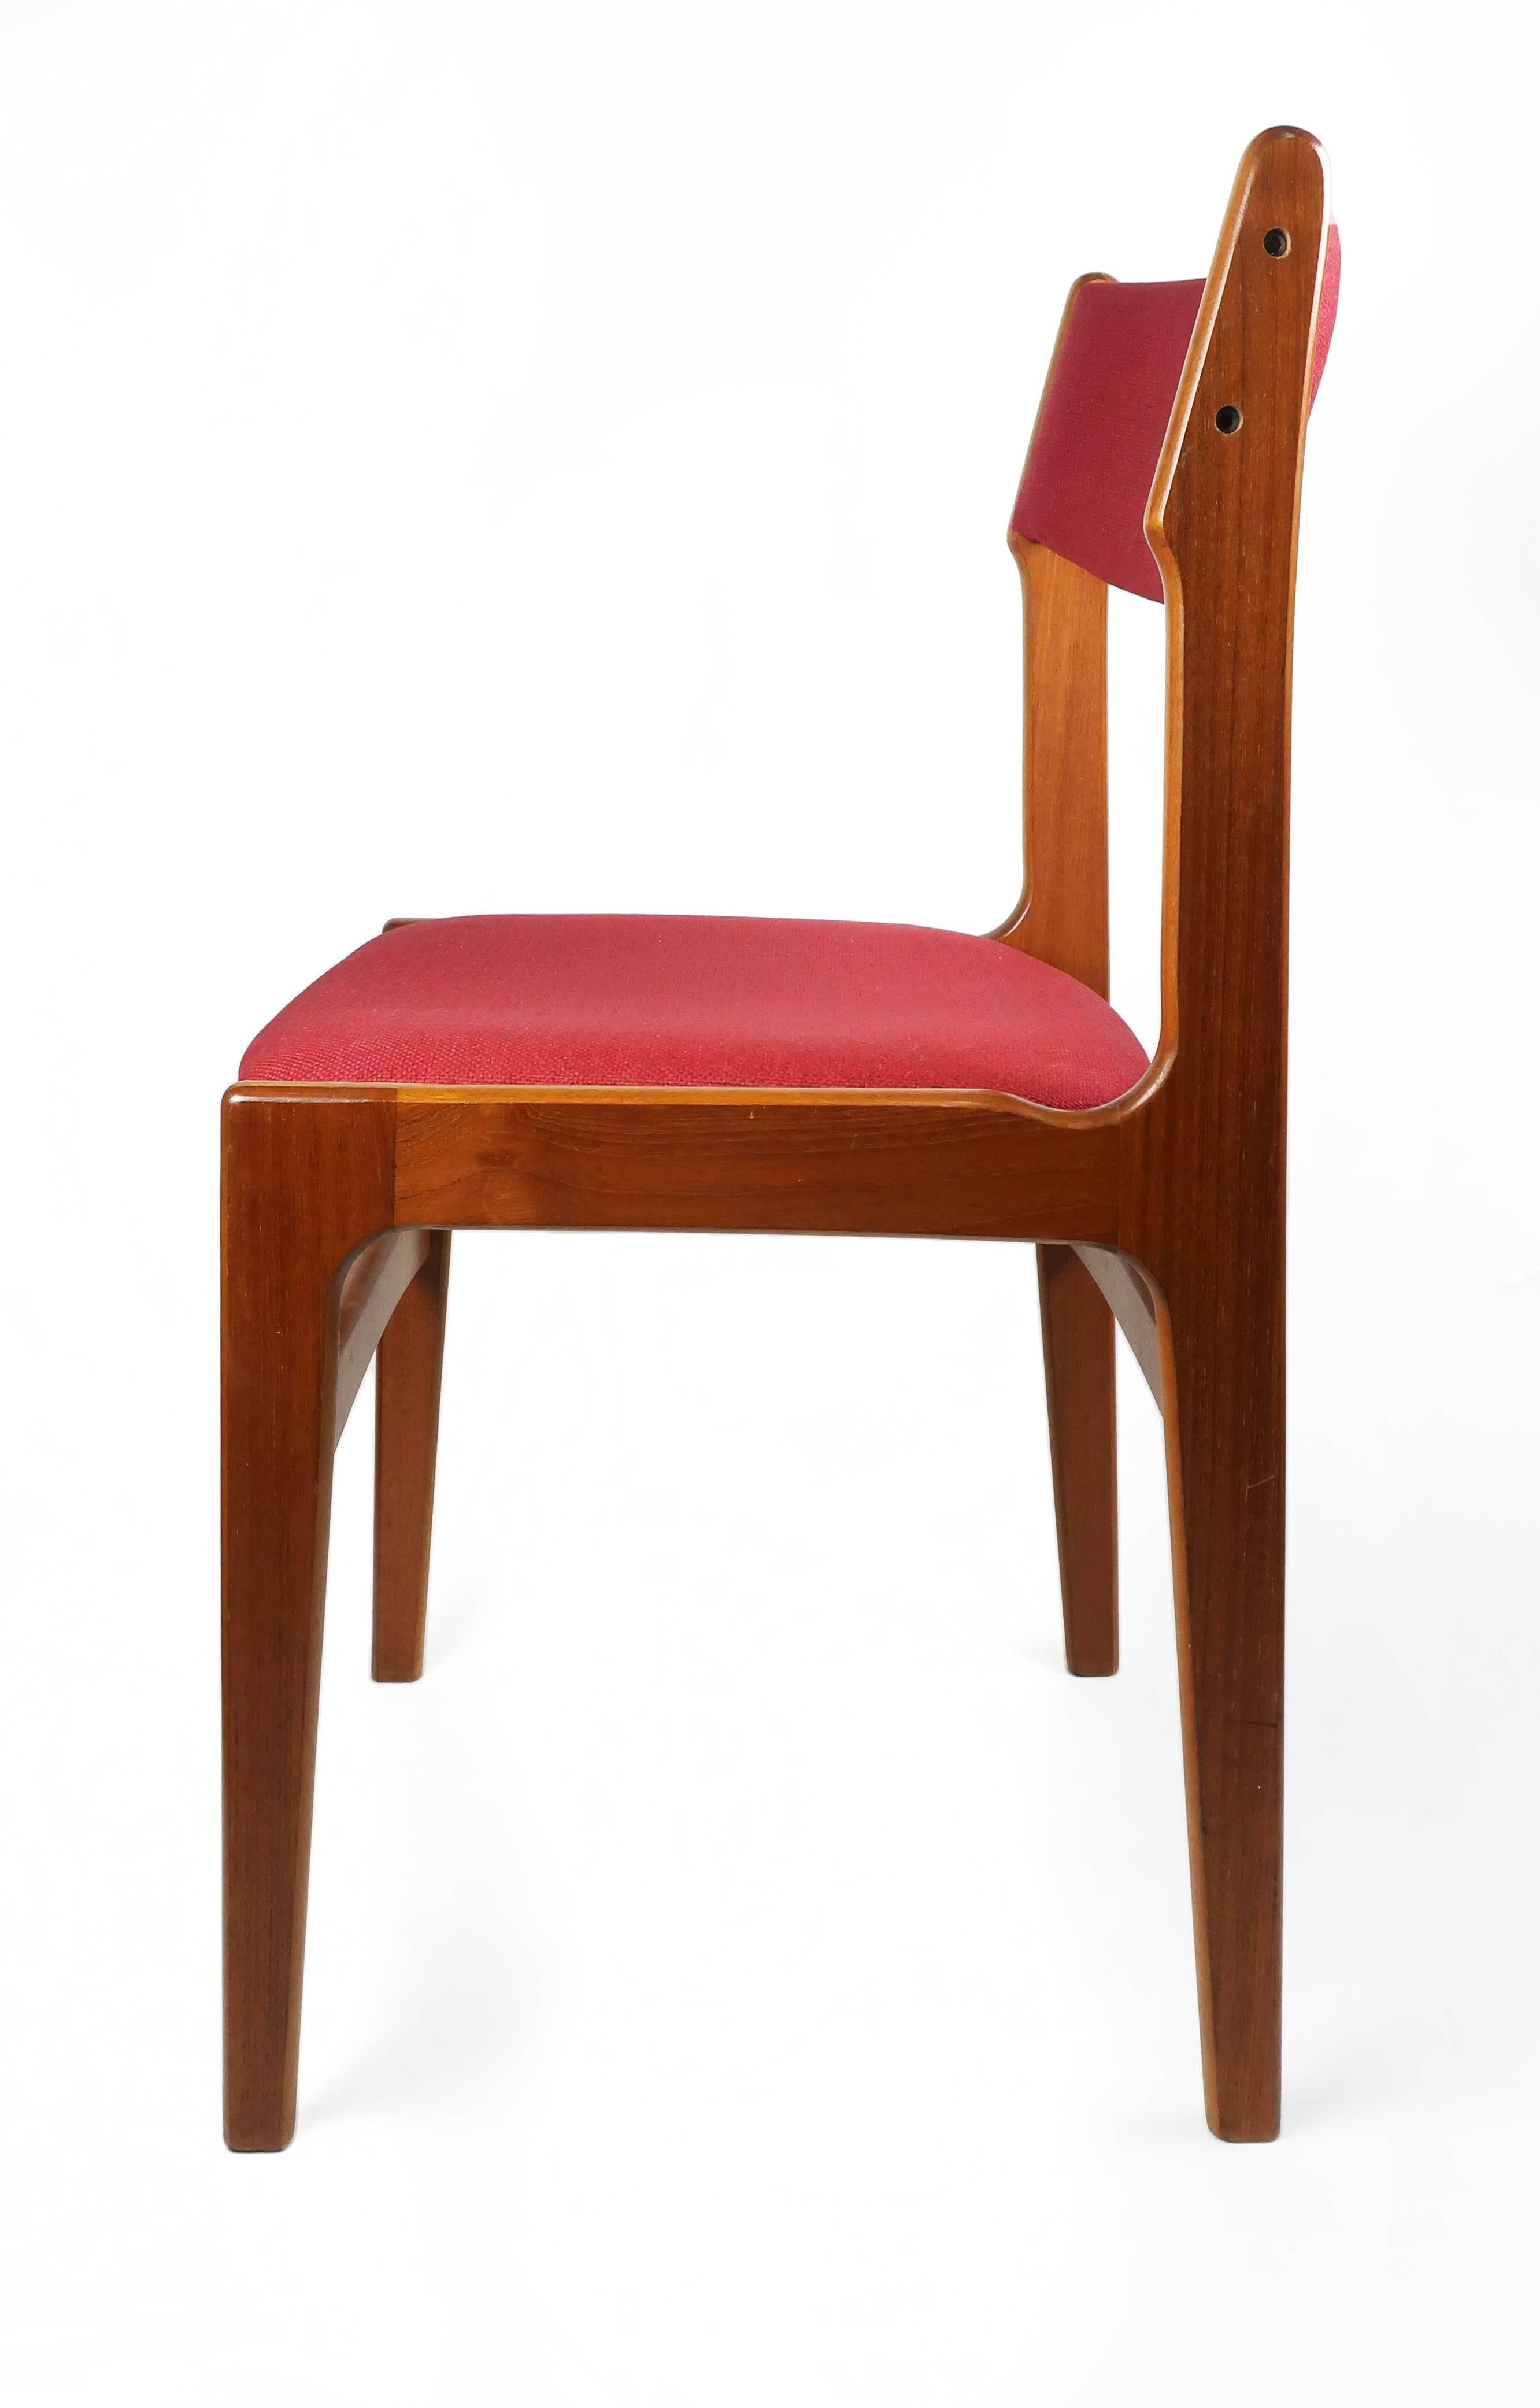 Pair of Danish Modern Dining Chairs by Erik Buch for Anderstrup Møbelfabrik 1